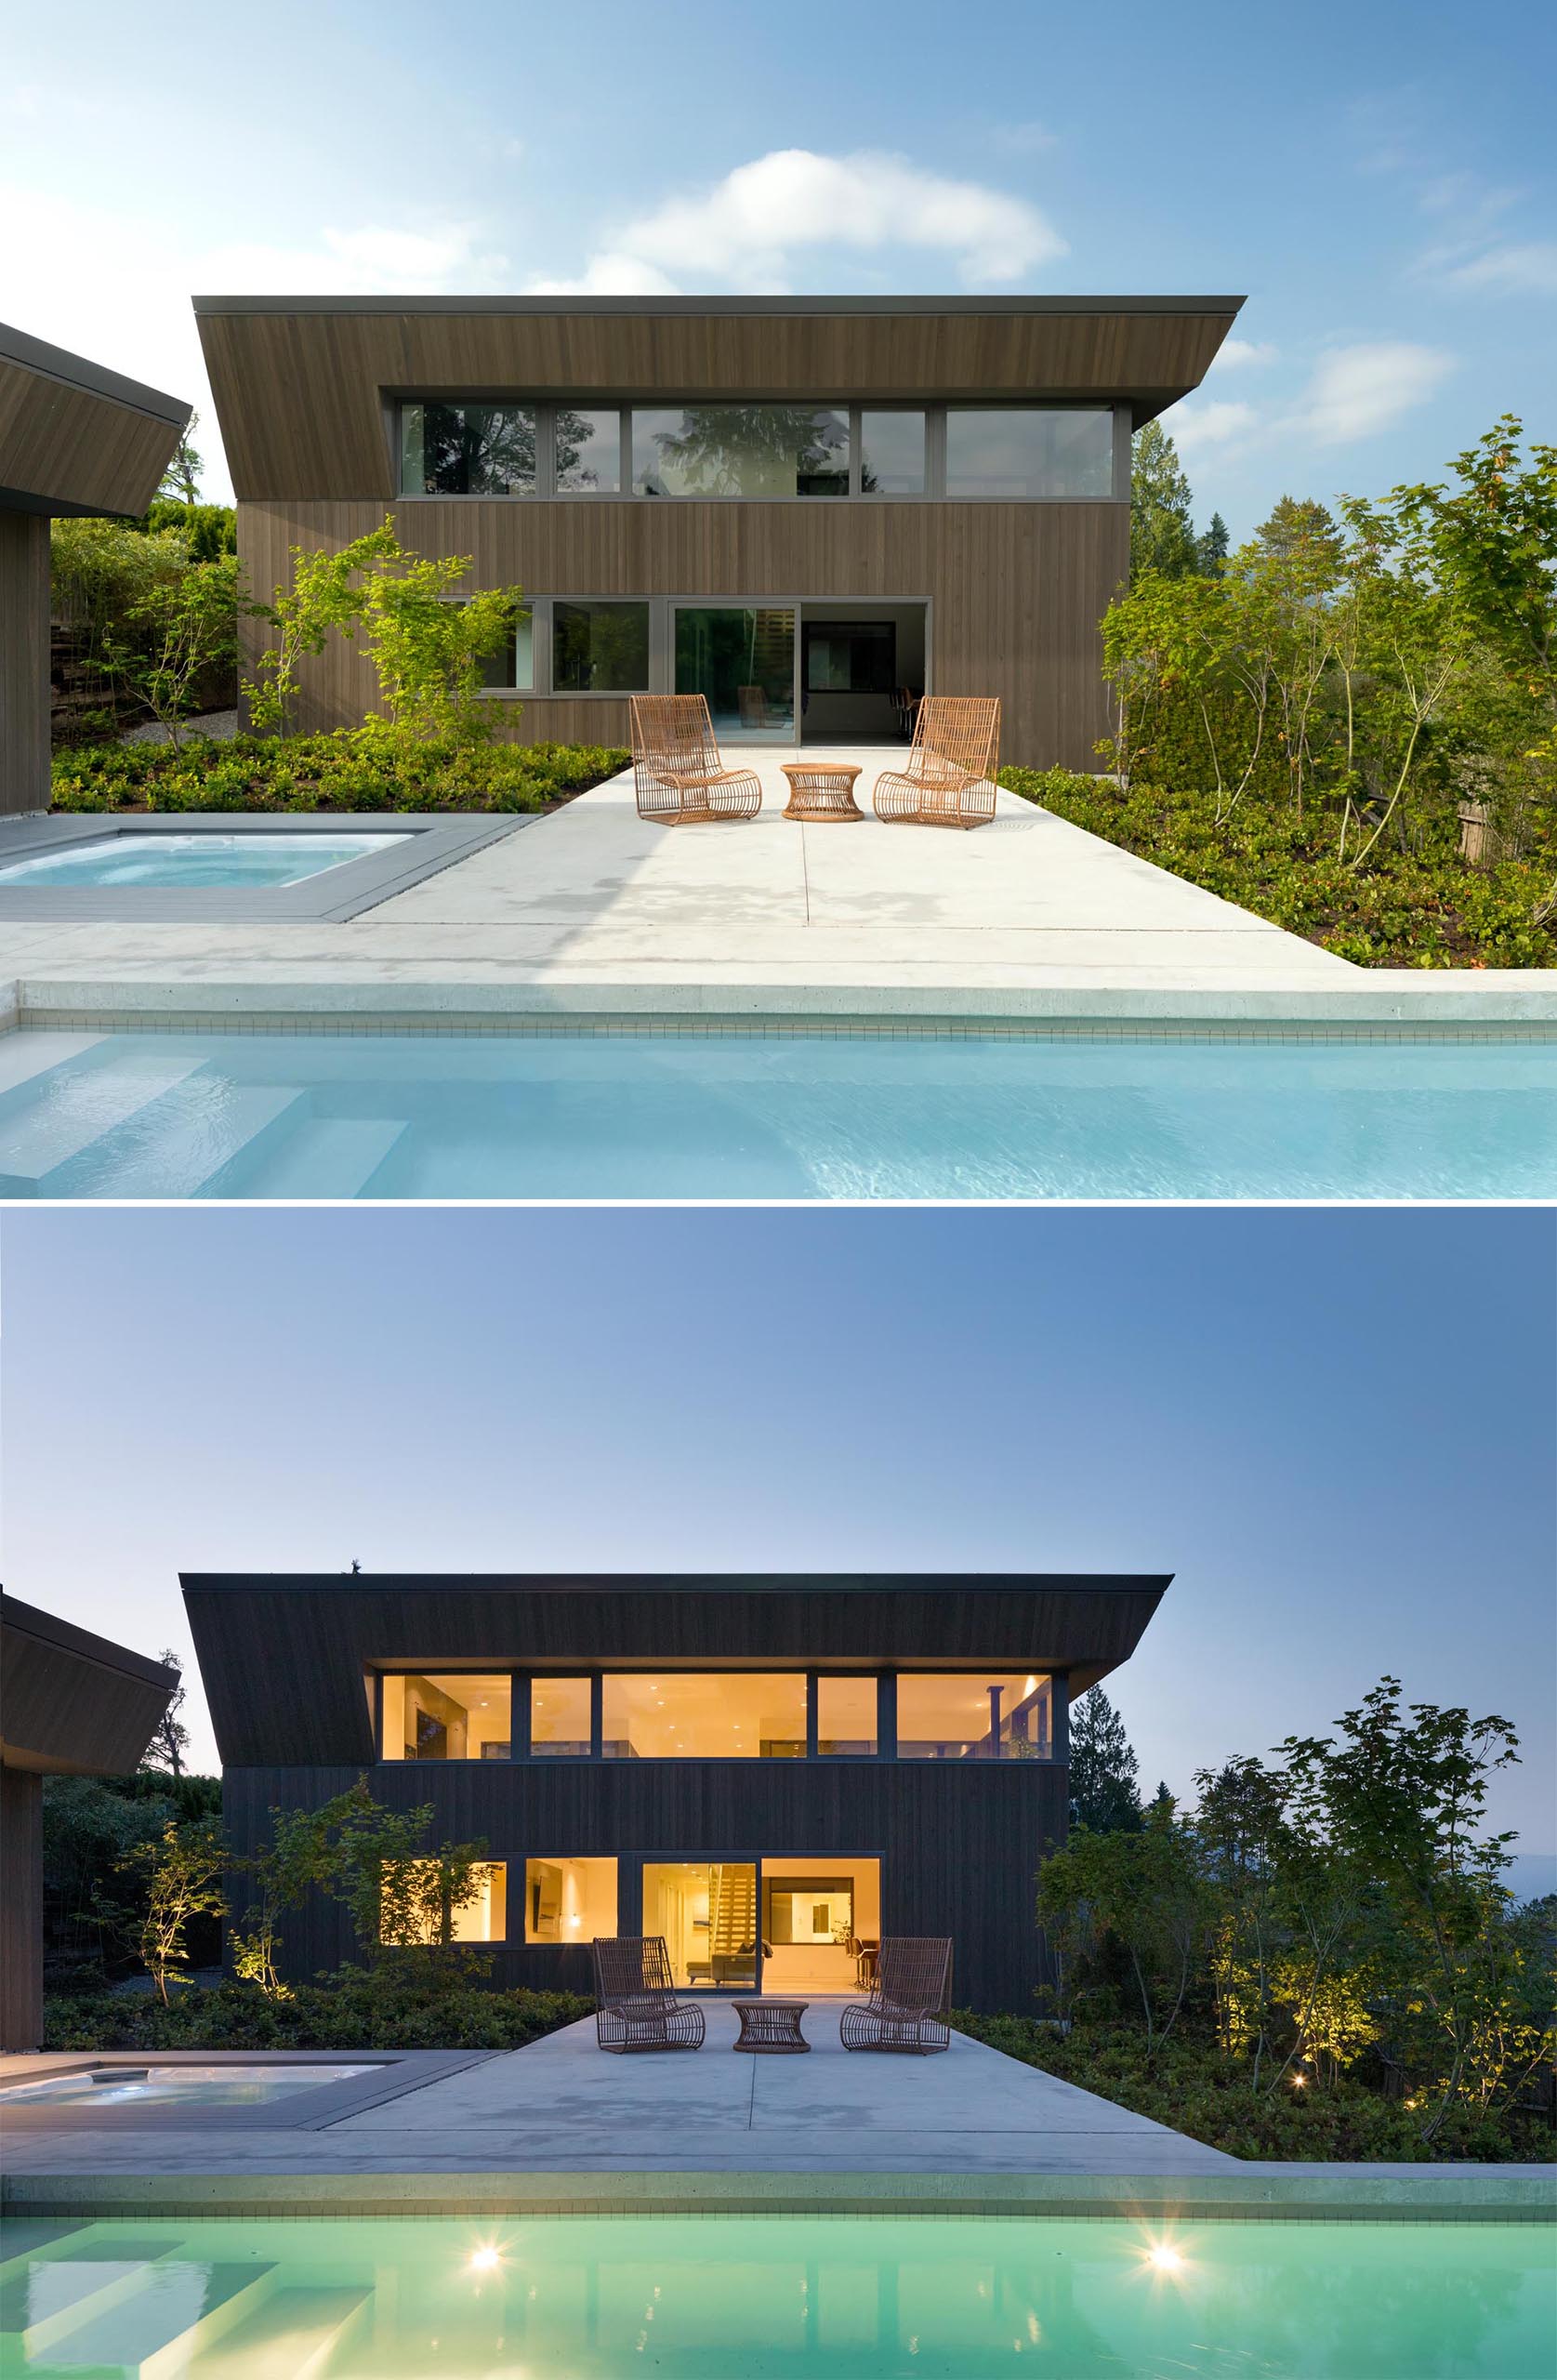 A modern house with a swimming pool, hot tub, and patio.